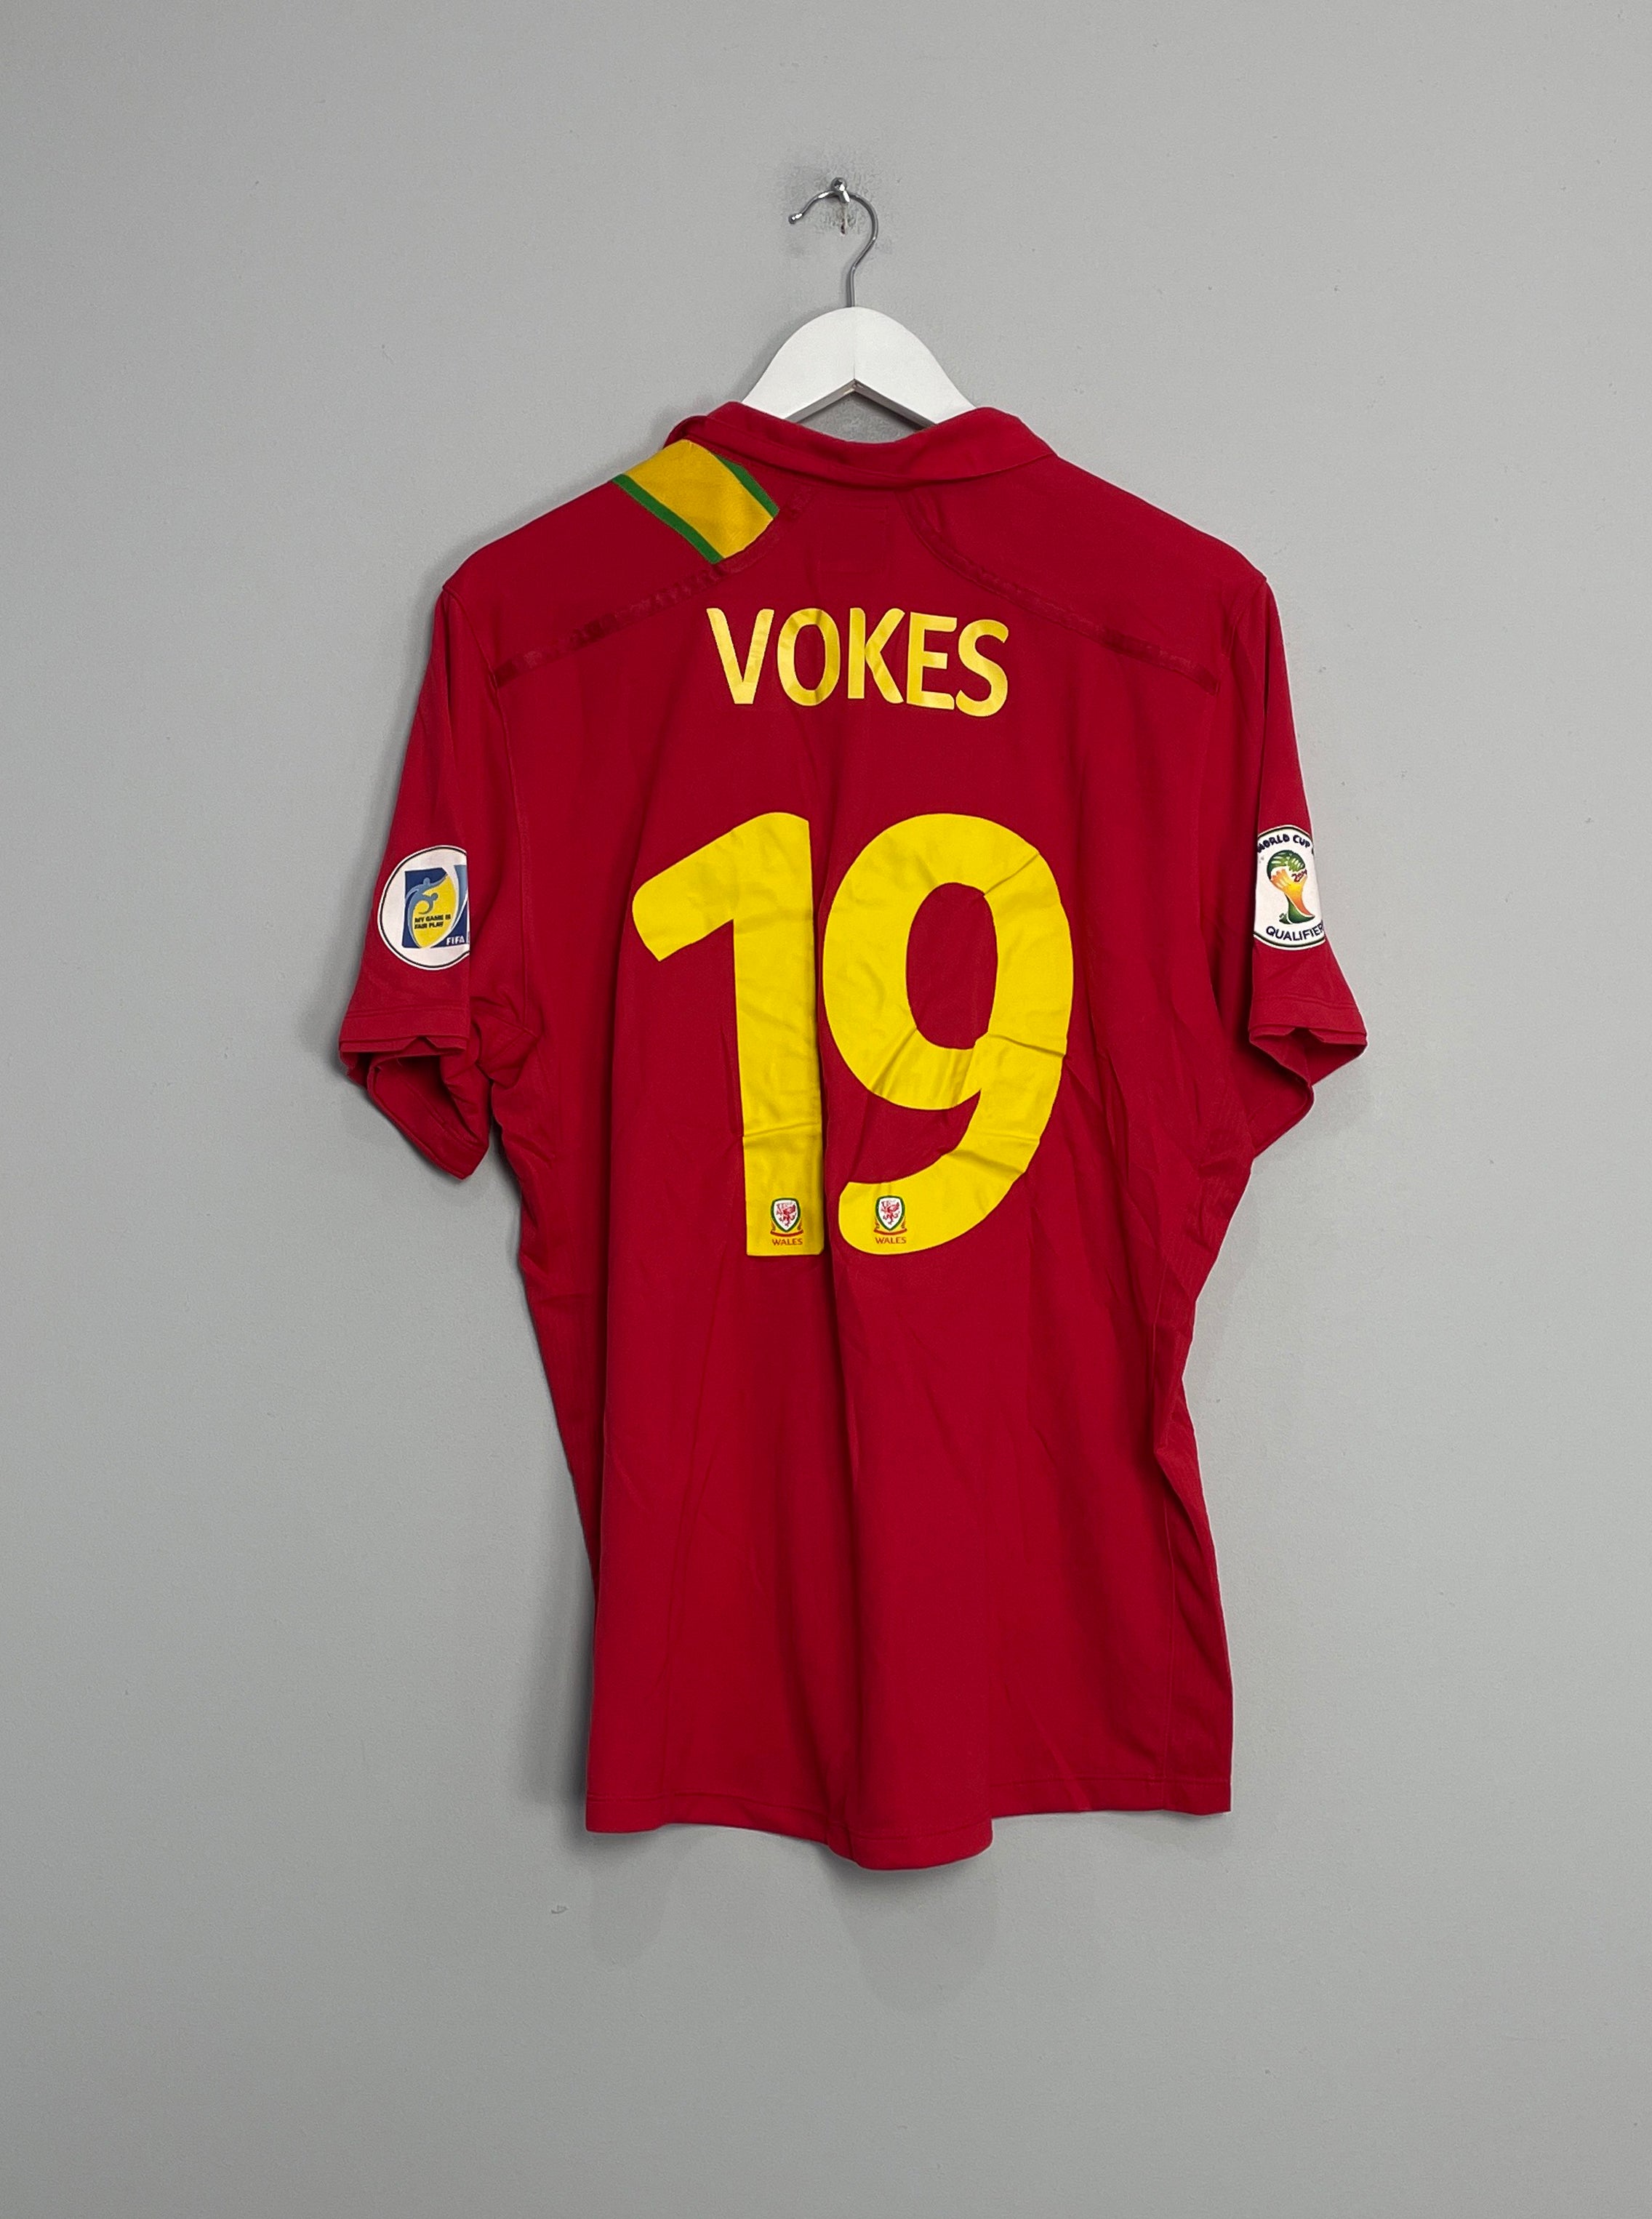 2012/13 WALES VOKES #19 *MATCH ISSUE + SIGNED* WC HOME SHIRT (L) UMBRO